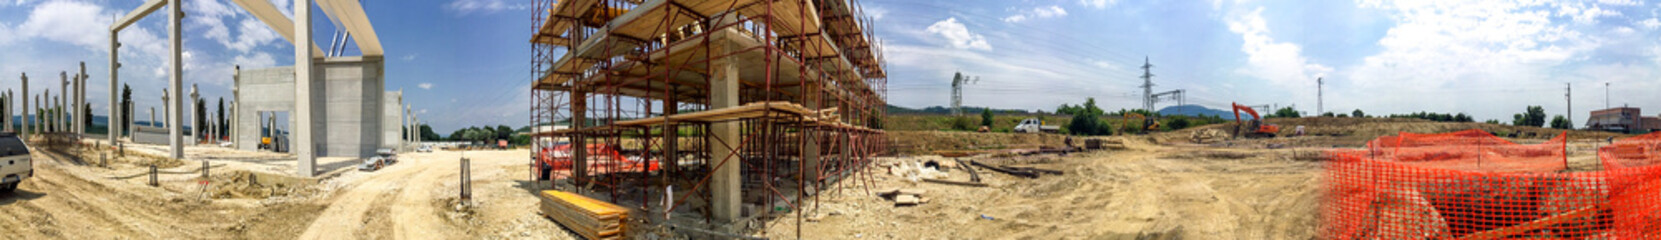 Building construction site, panoramic view